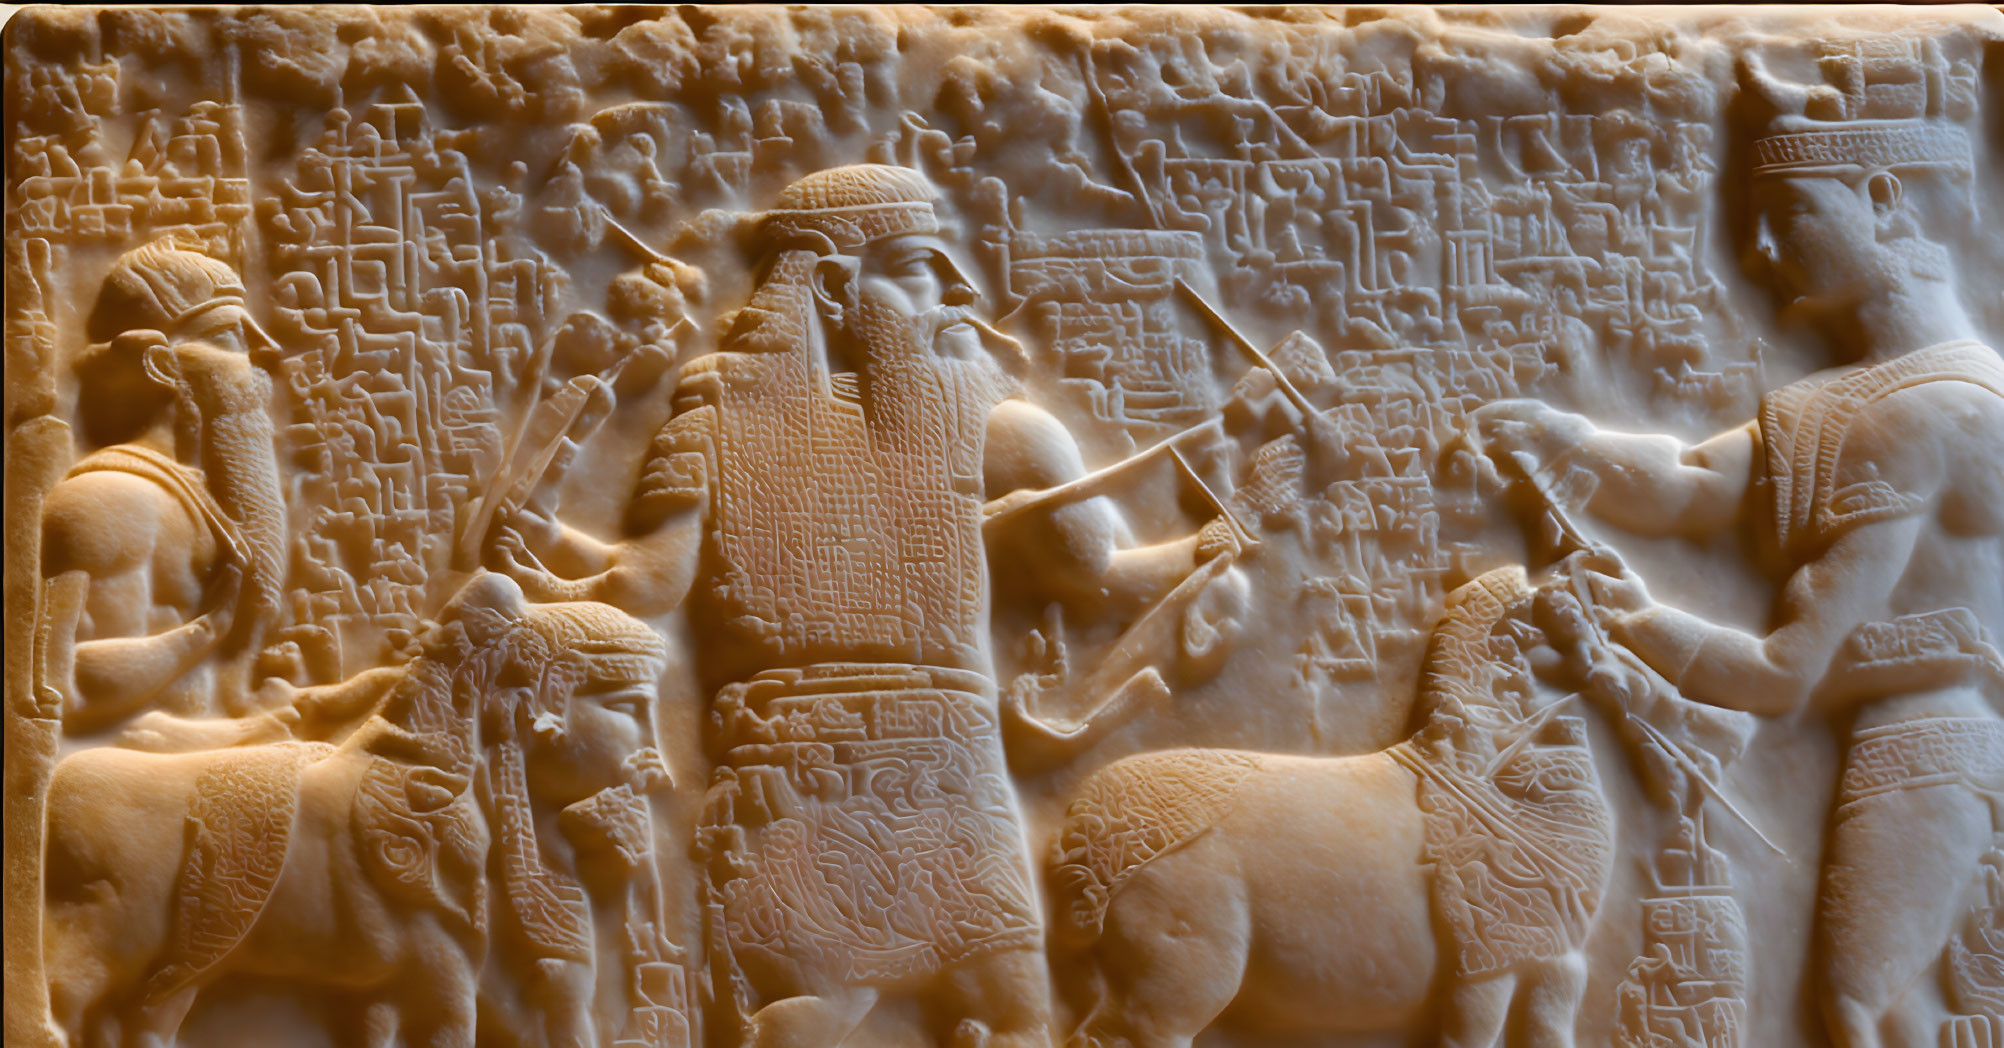 Ancient relief with figures in traditional garb on horseback, detailed interaction, and cuneiform